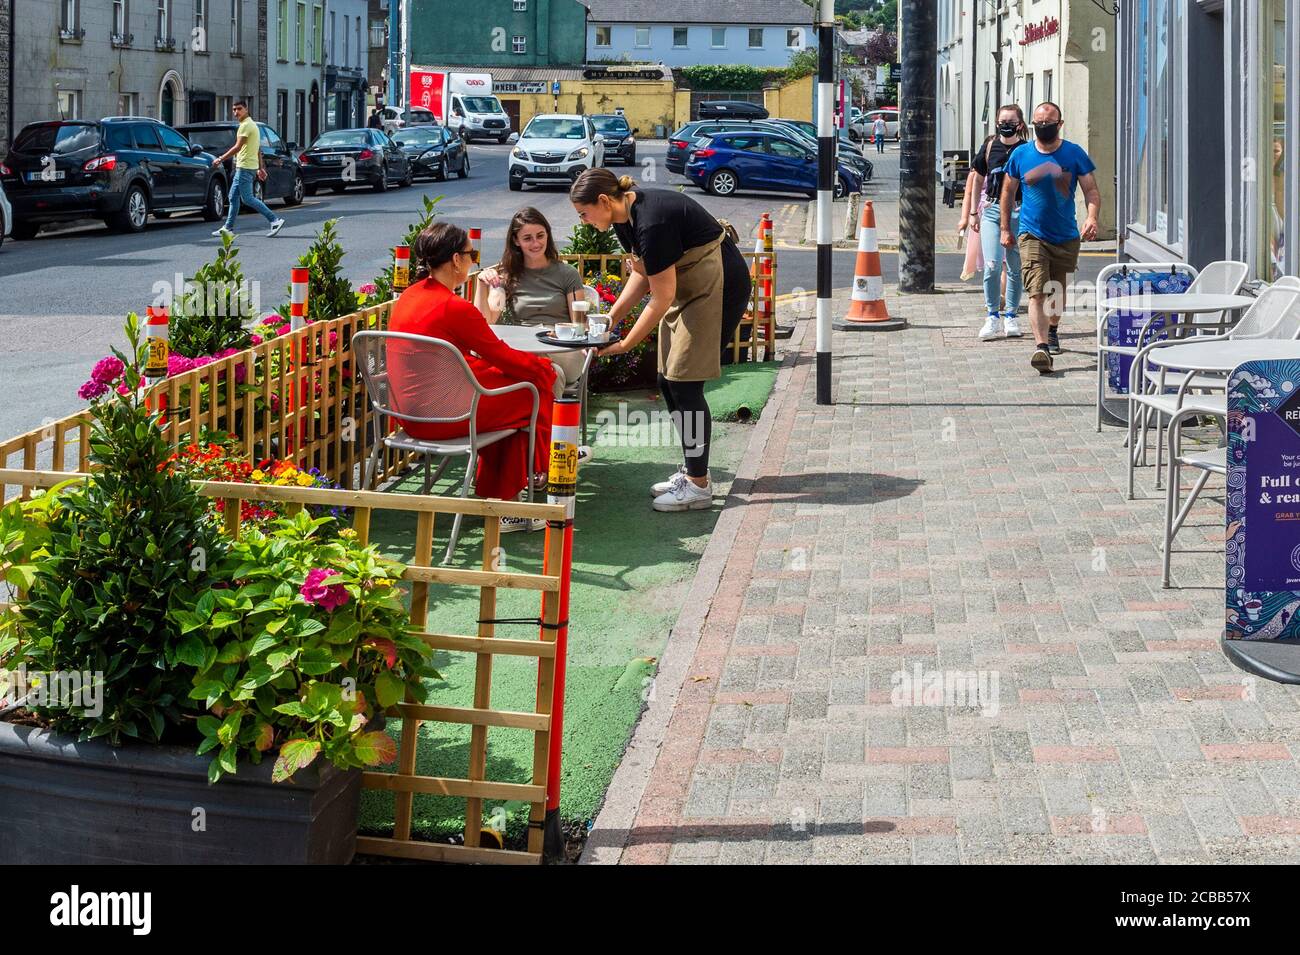 Bandon, West Cork, Ireland. 12th Aug, 2020. Outdoor seating at cafés is becoming the new normal with the COVID-19 pandemic upon us. A waitress serves two customers outside a café in Bandon this afternoon. Credit: AG News/Alamy Live News Stock Photo